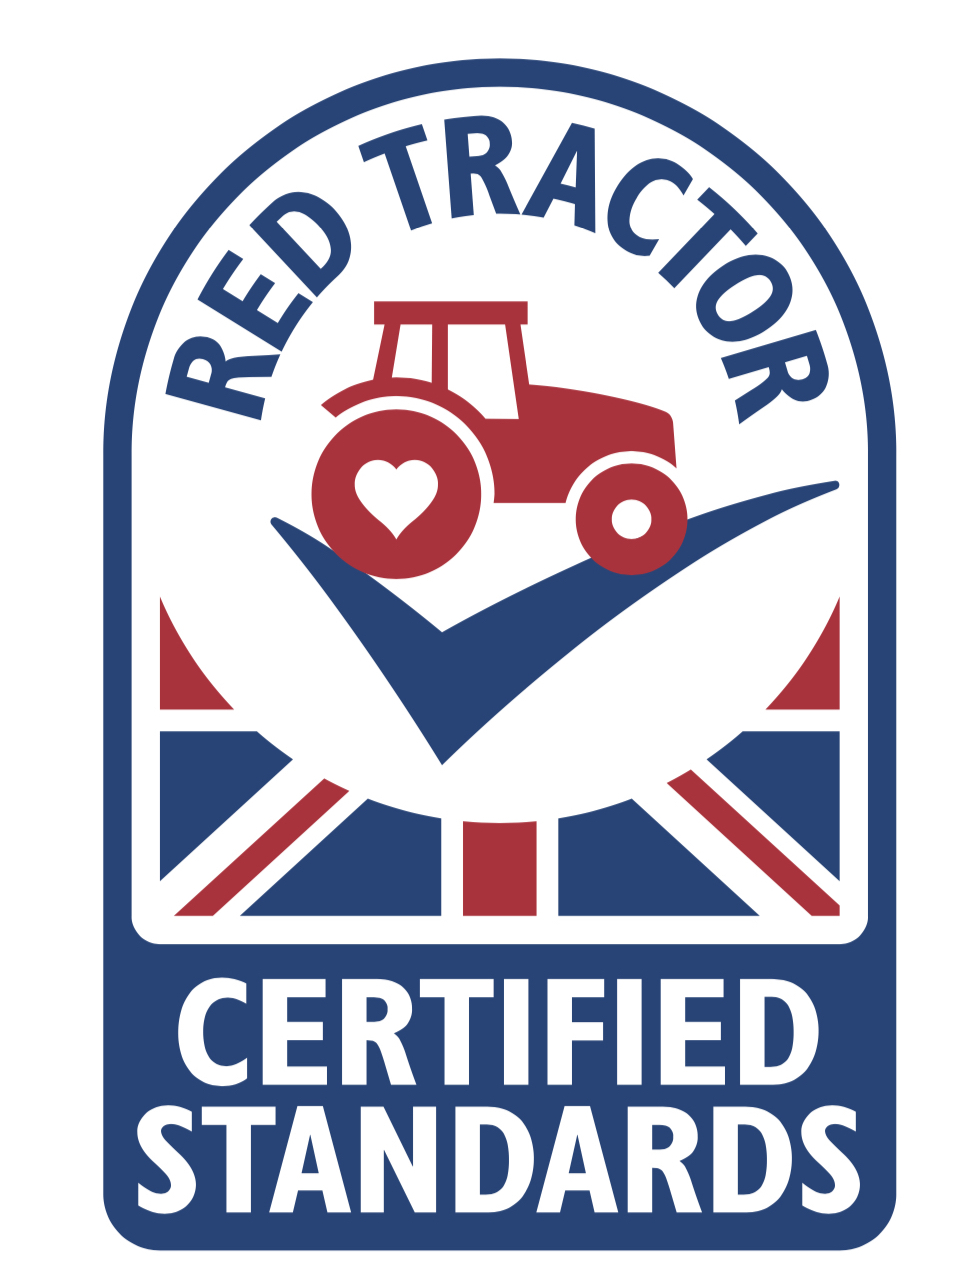 The new Red Tractor Certified Standards logo